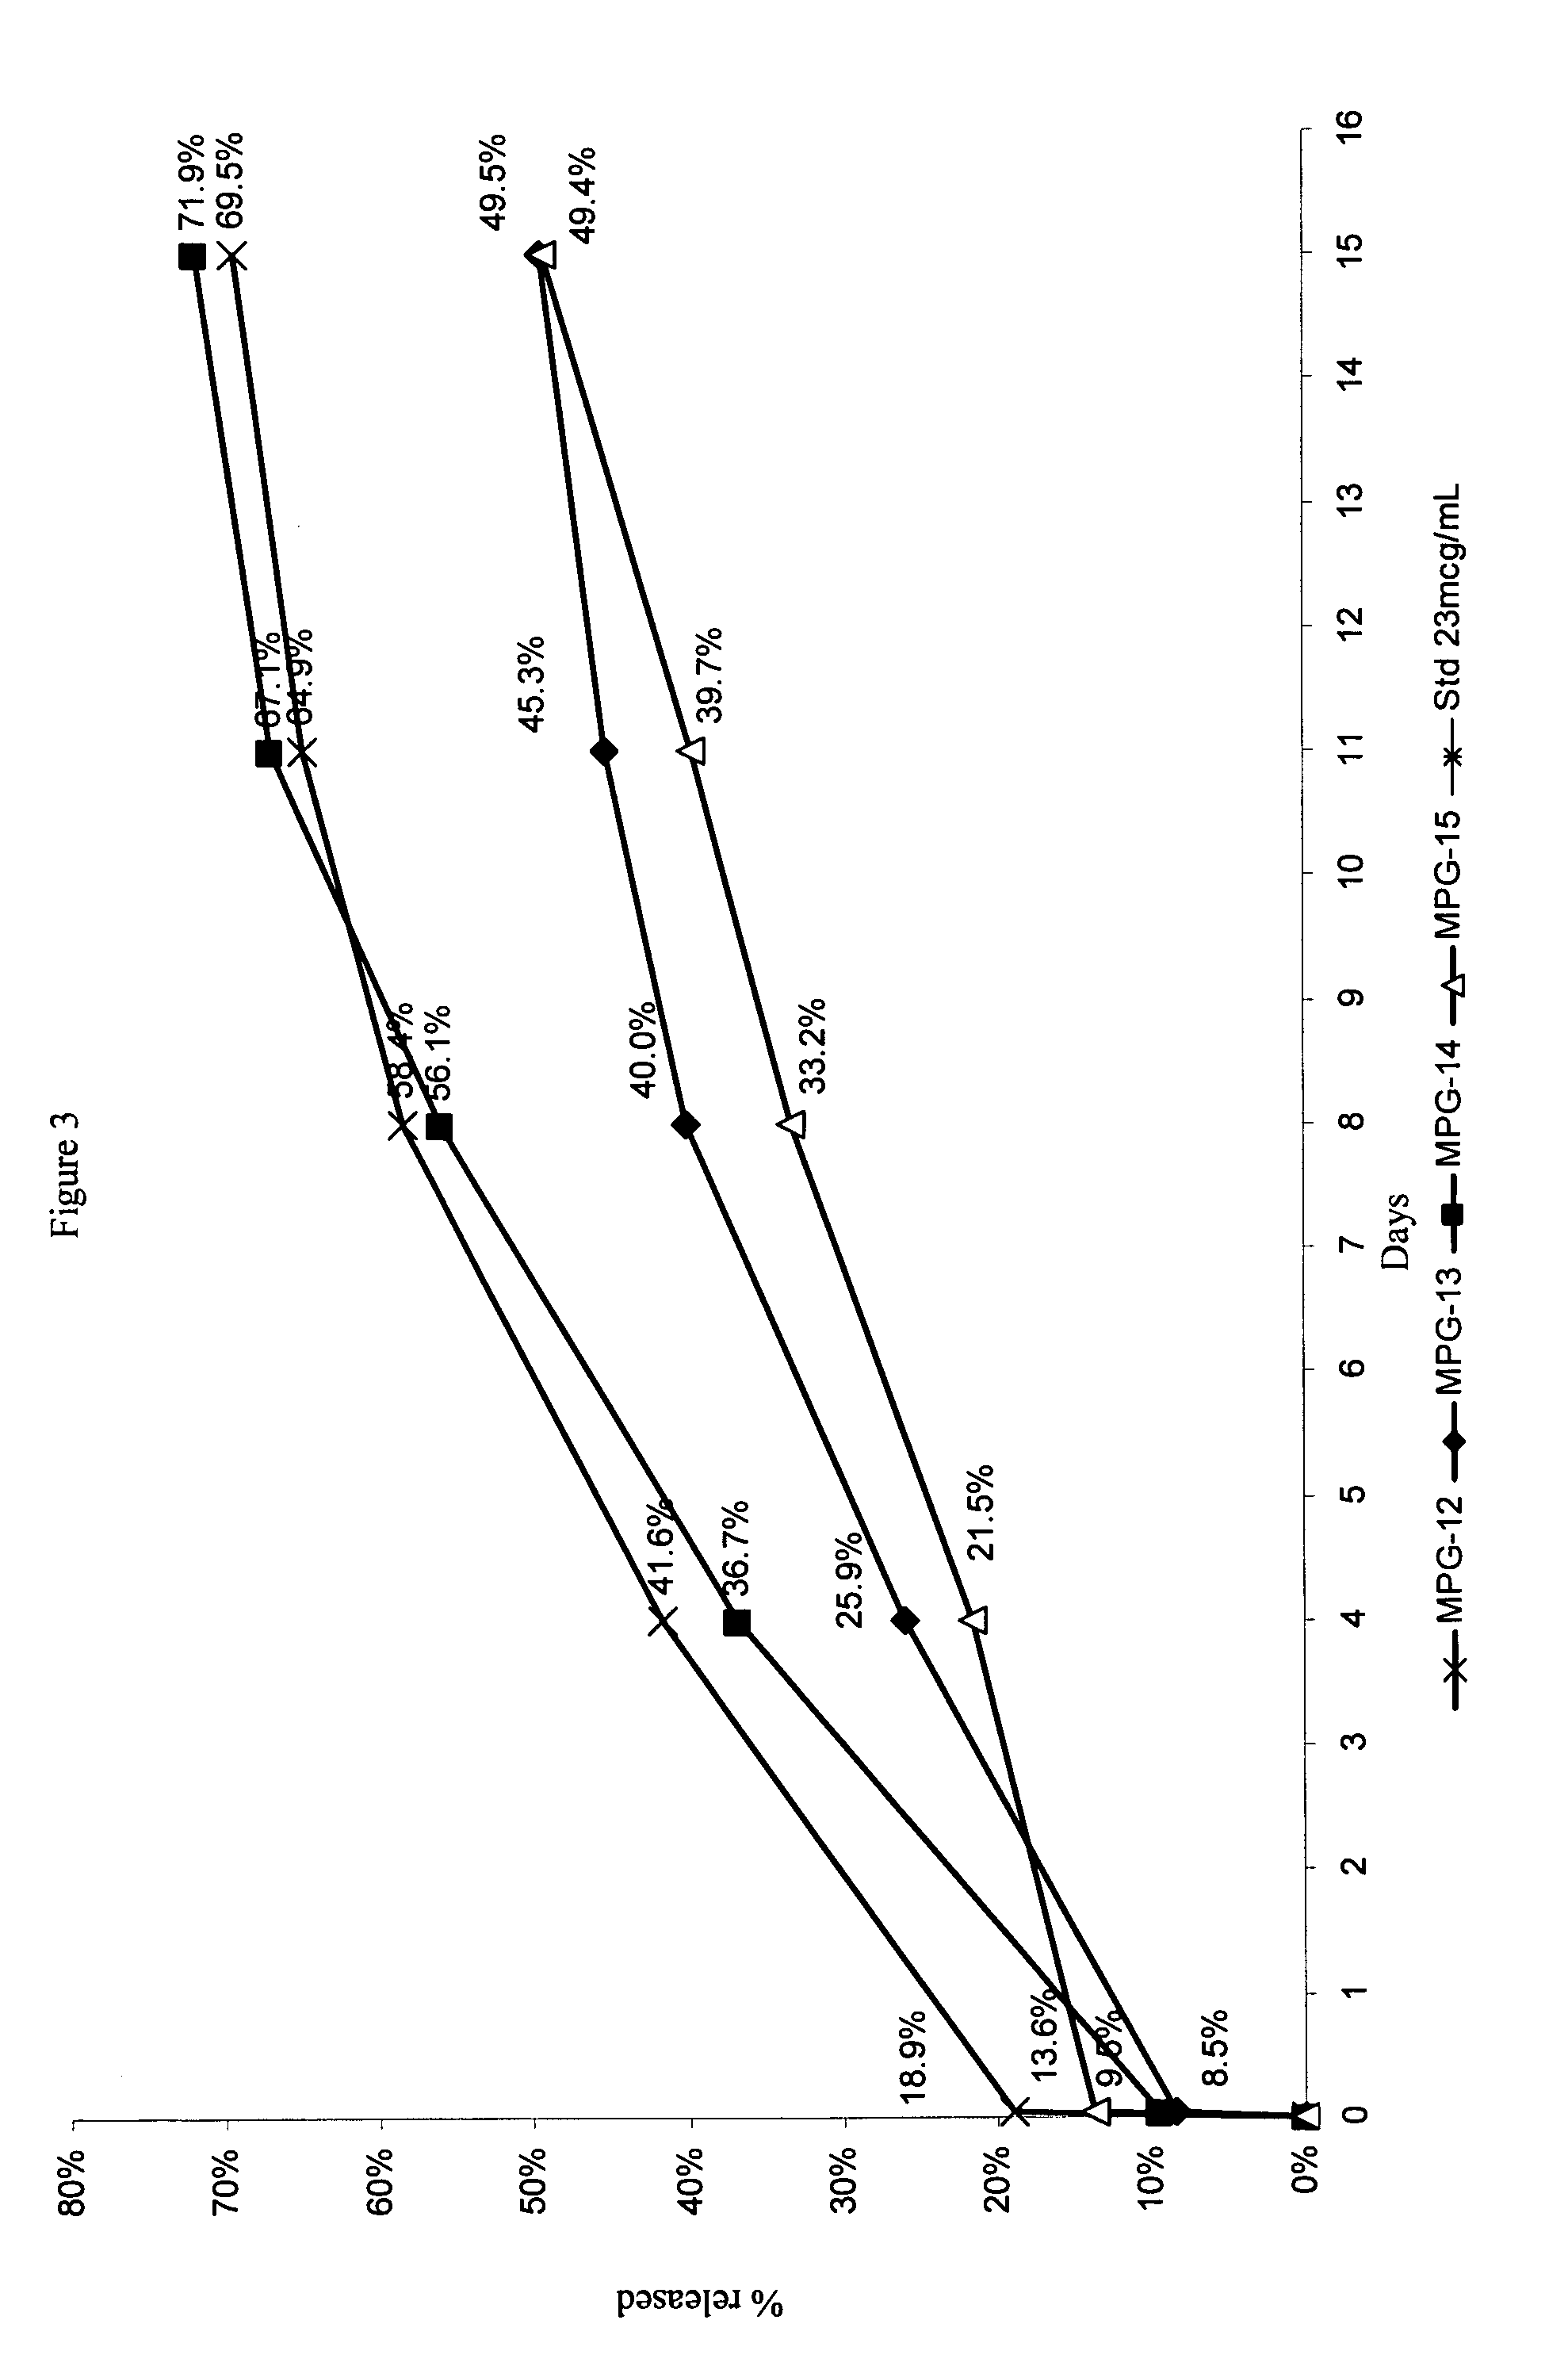 Depot systems comprising glatiramer or a pharmacologically acceptable salt thereof